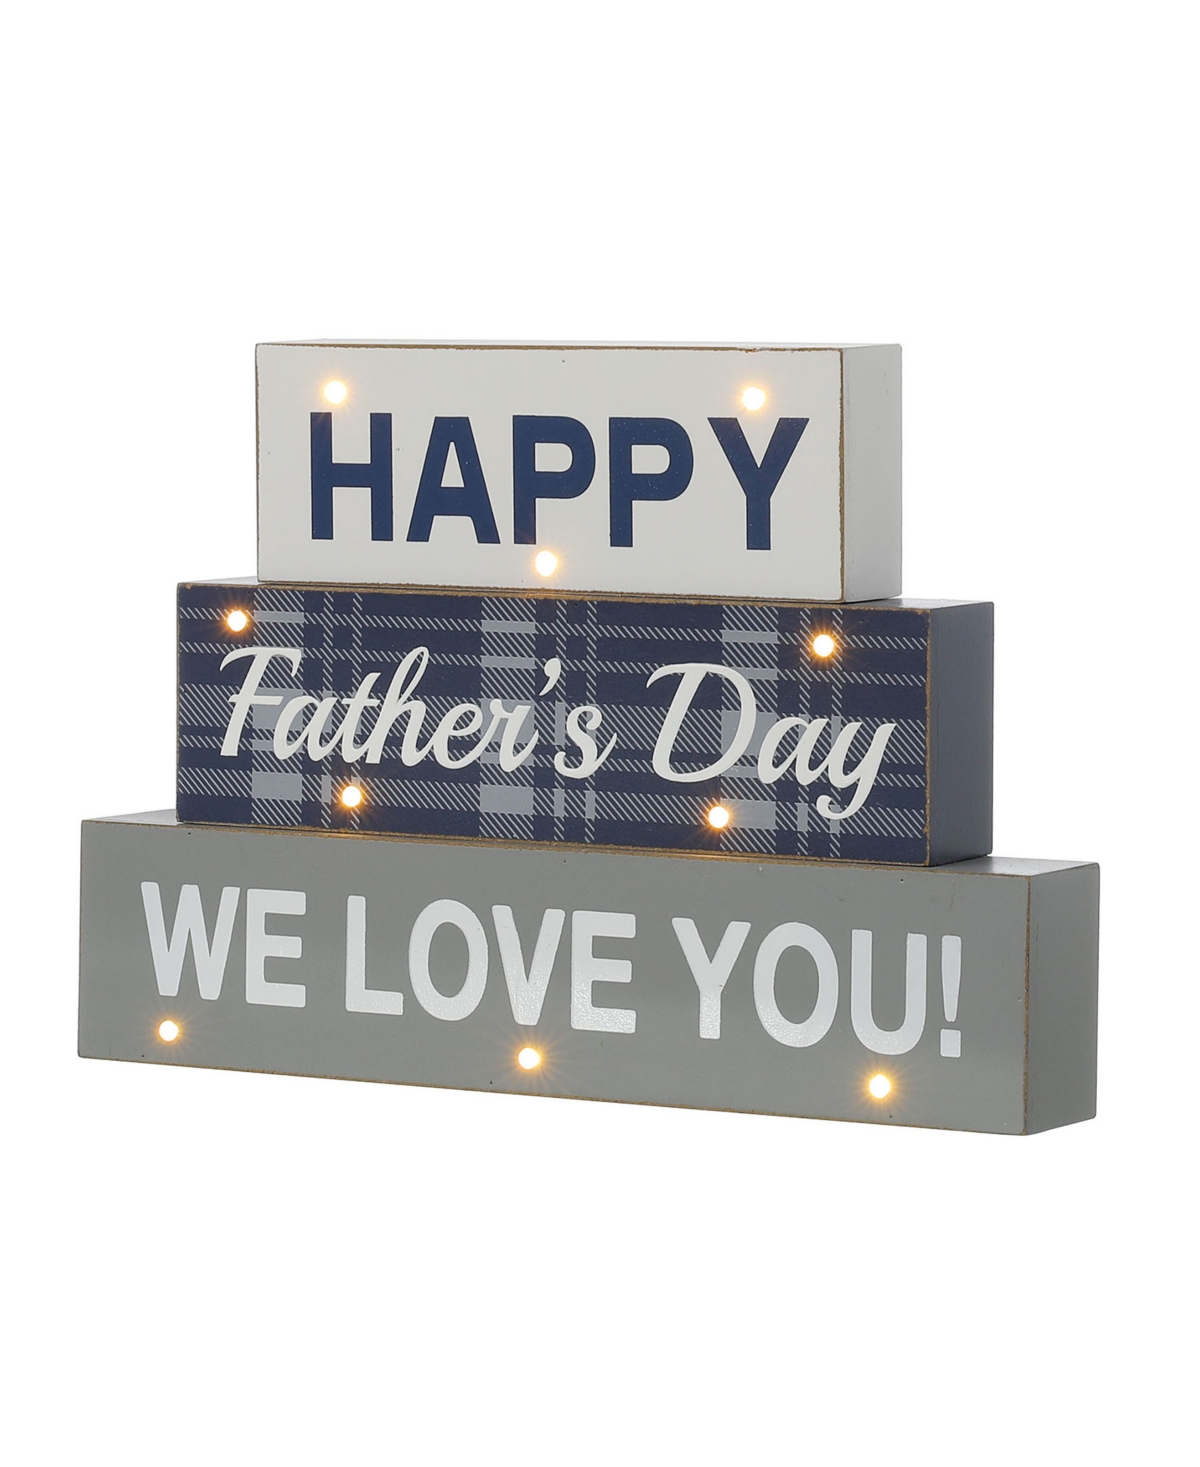 12" Lighted Wooden Happy Father's Day Block Sign - Blue